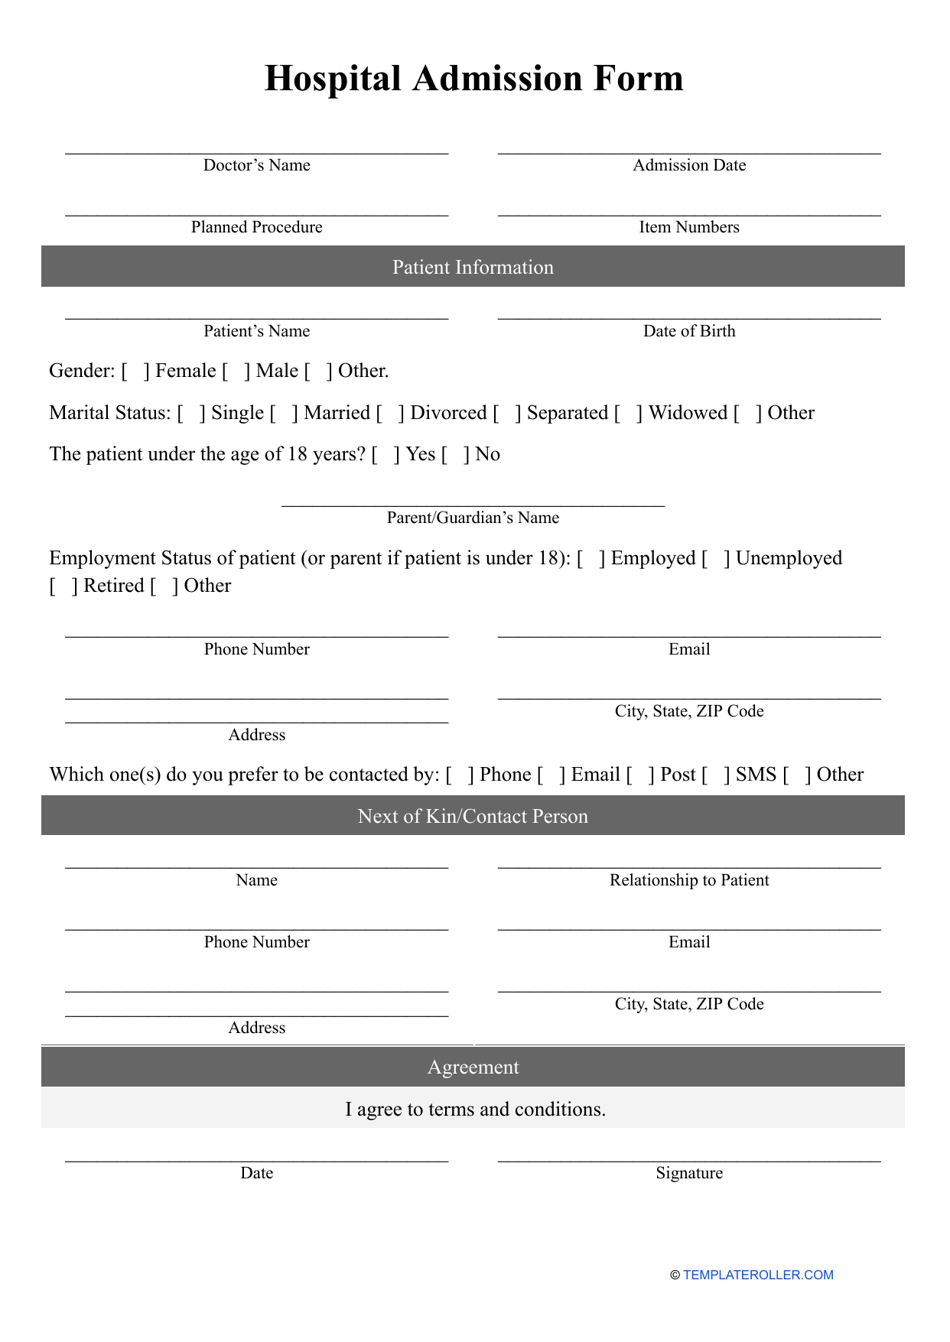 Hospital Admission Form Fill Out Sign Online And Download Pdf Templateroller 5278